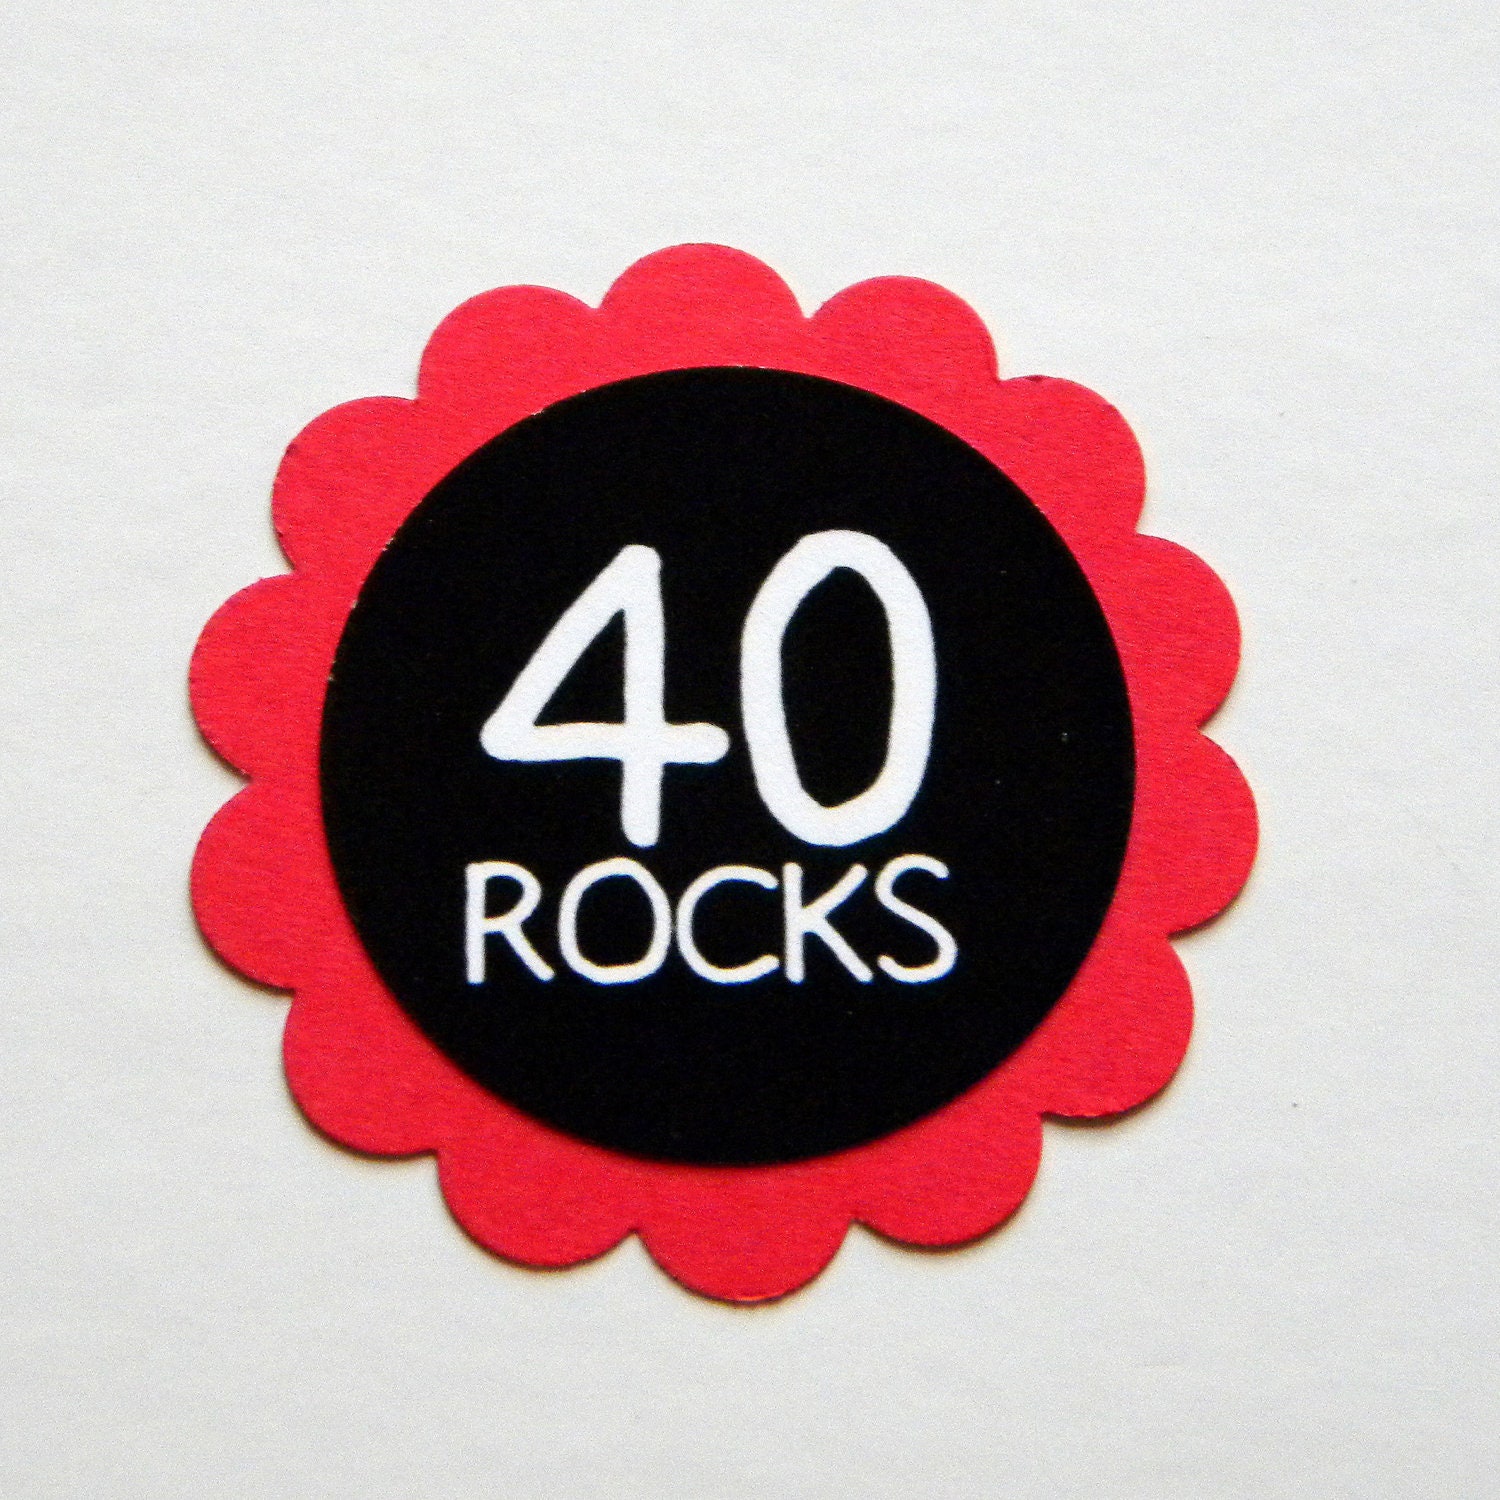 40th-birthday-favor-tags-40-rocks-set-of-12-red-and-black-by-cara-s